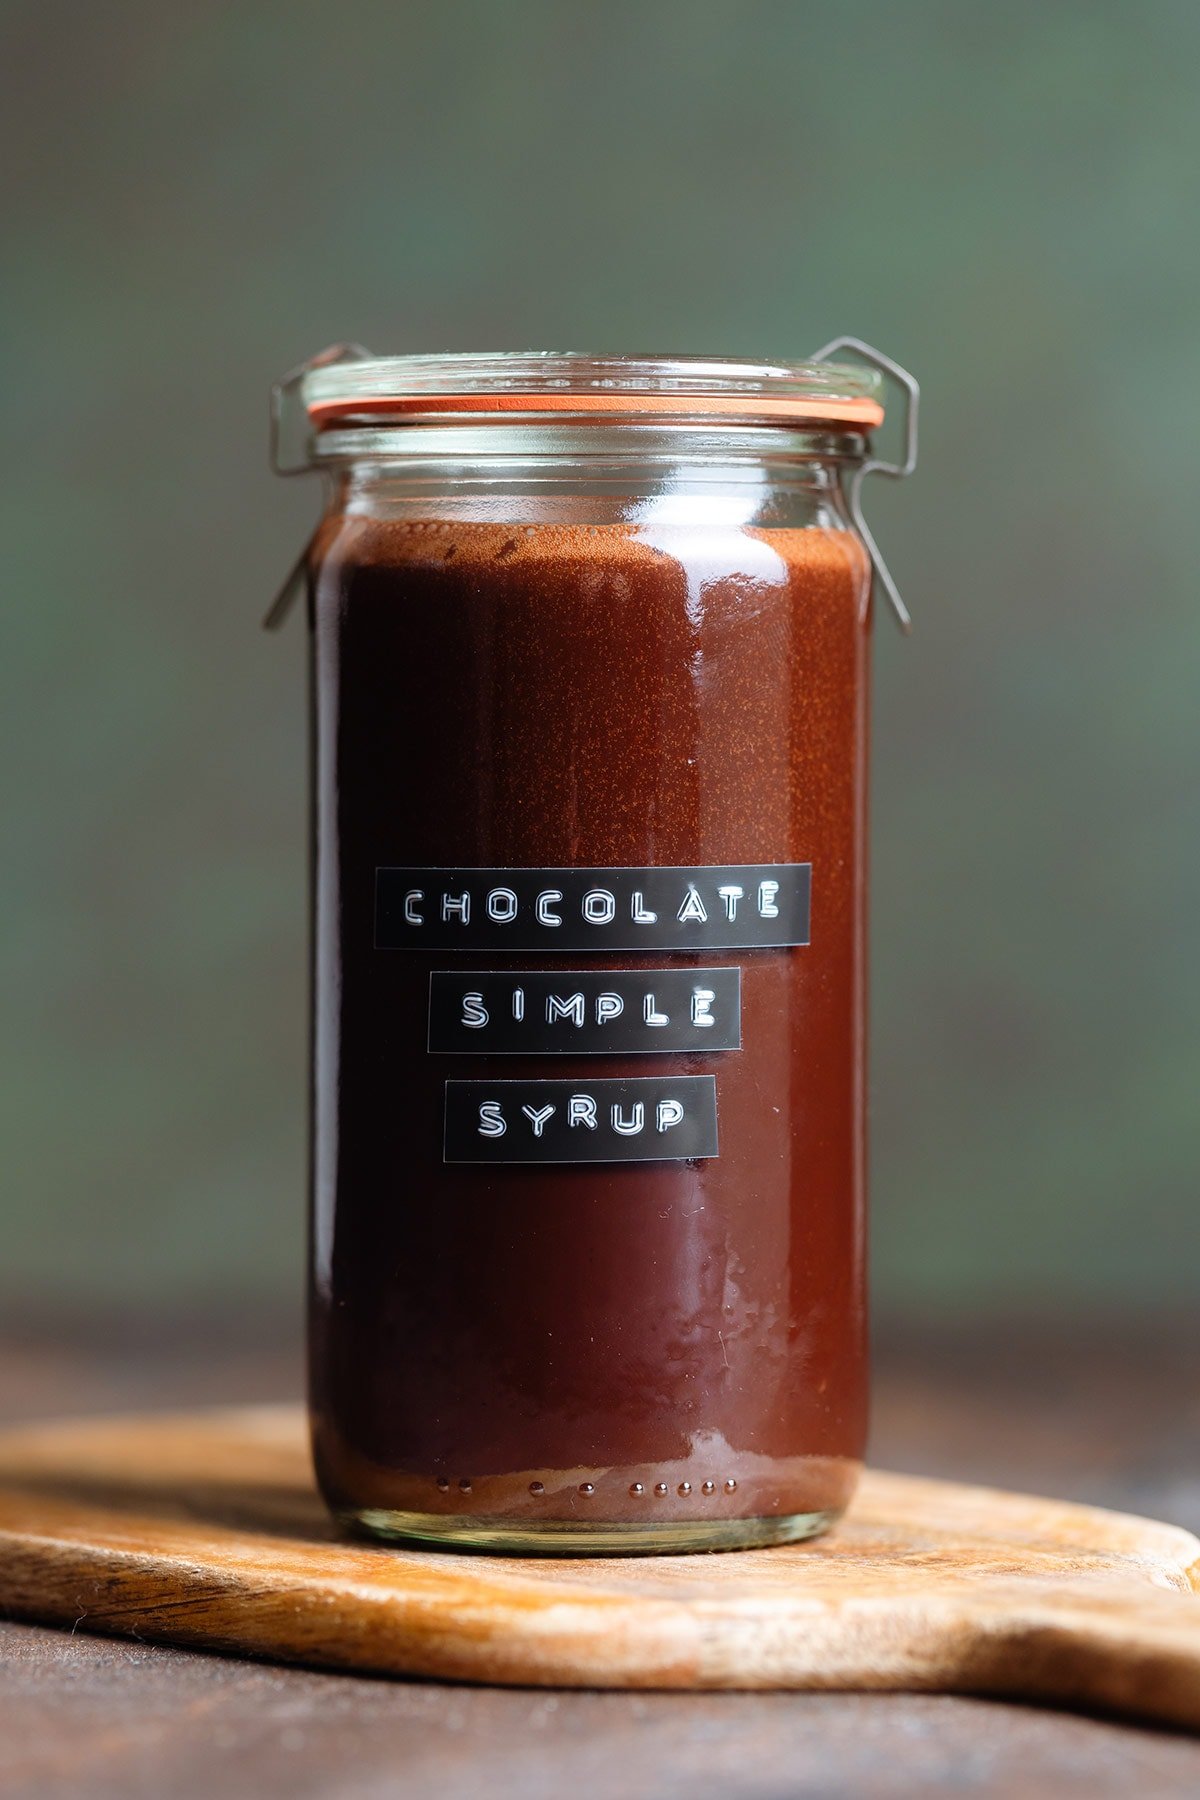 Chocolate syrup in a glass jar with a black and white embossed label on a dark wooden background.